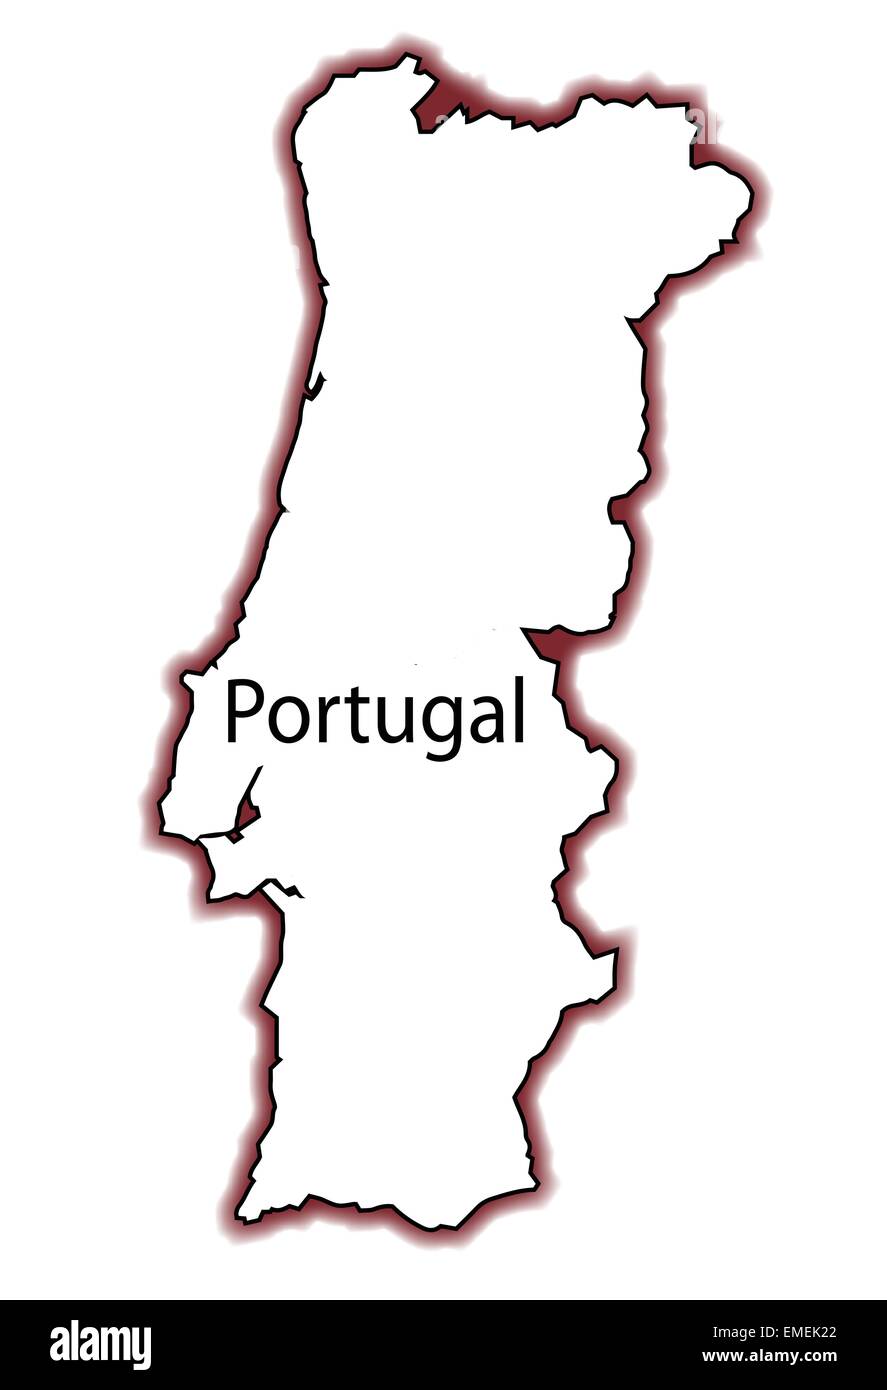 Printable Vector Map of Portugal with Districts - Single Color